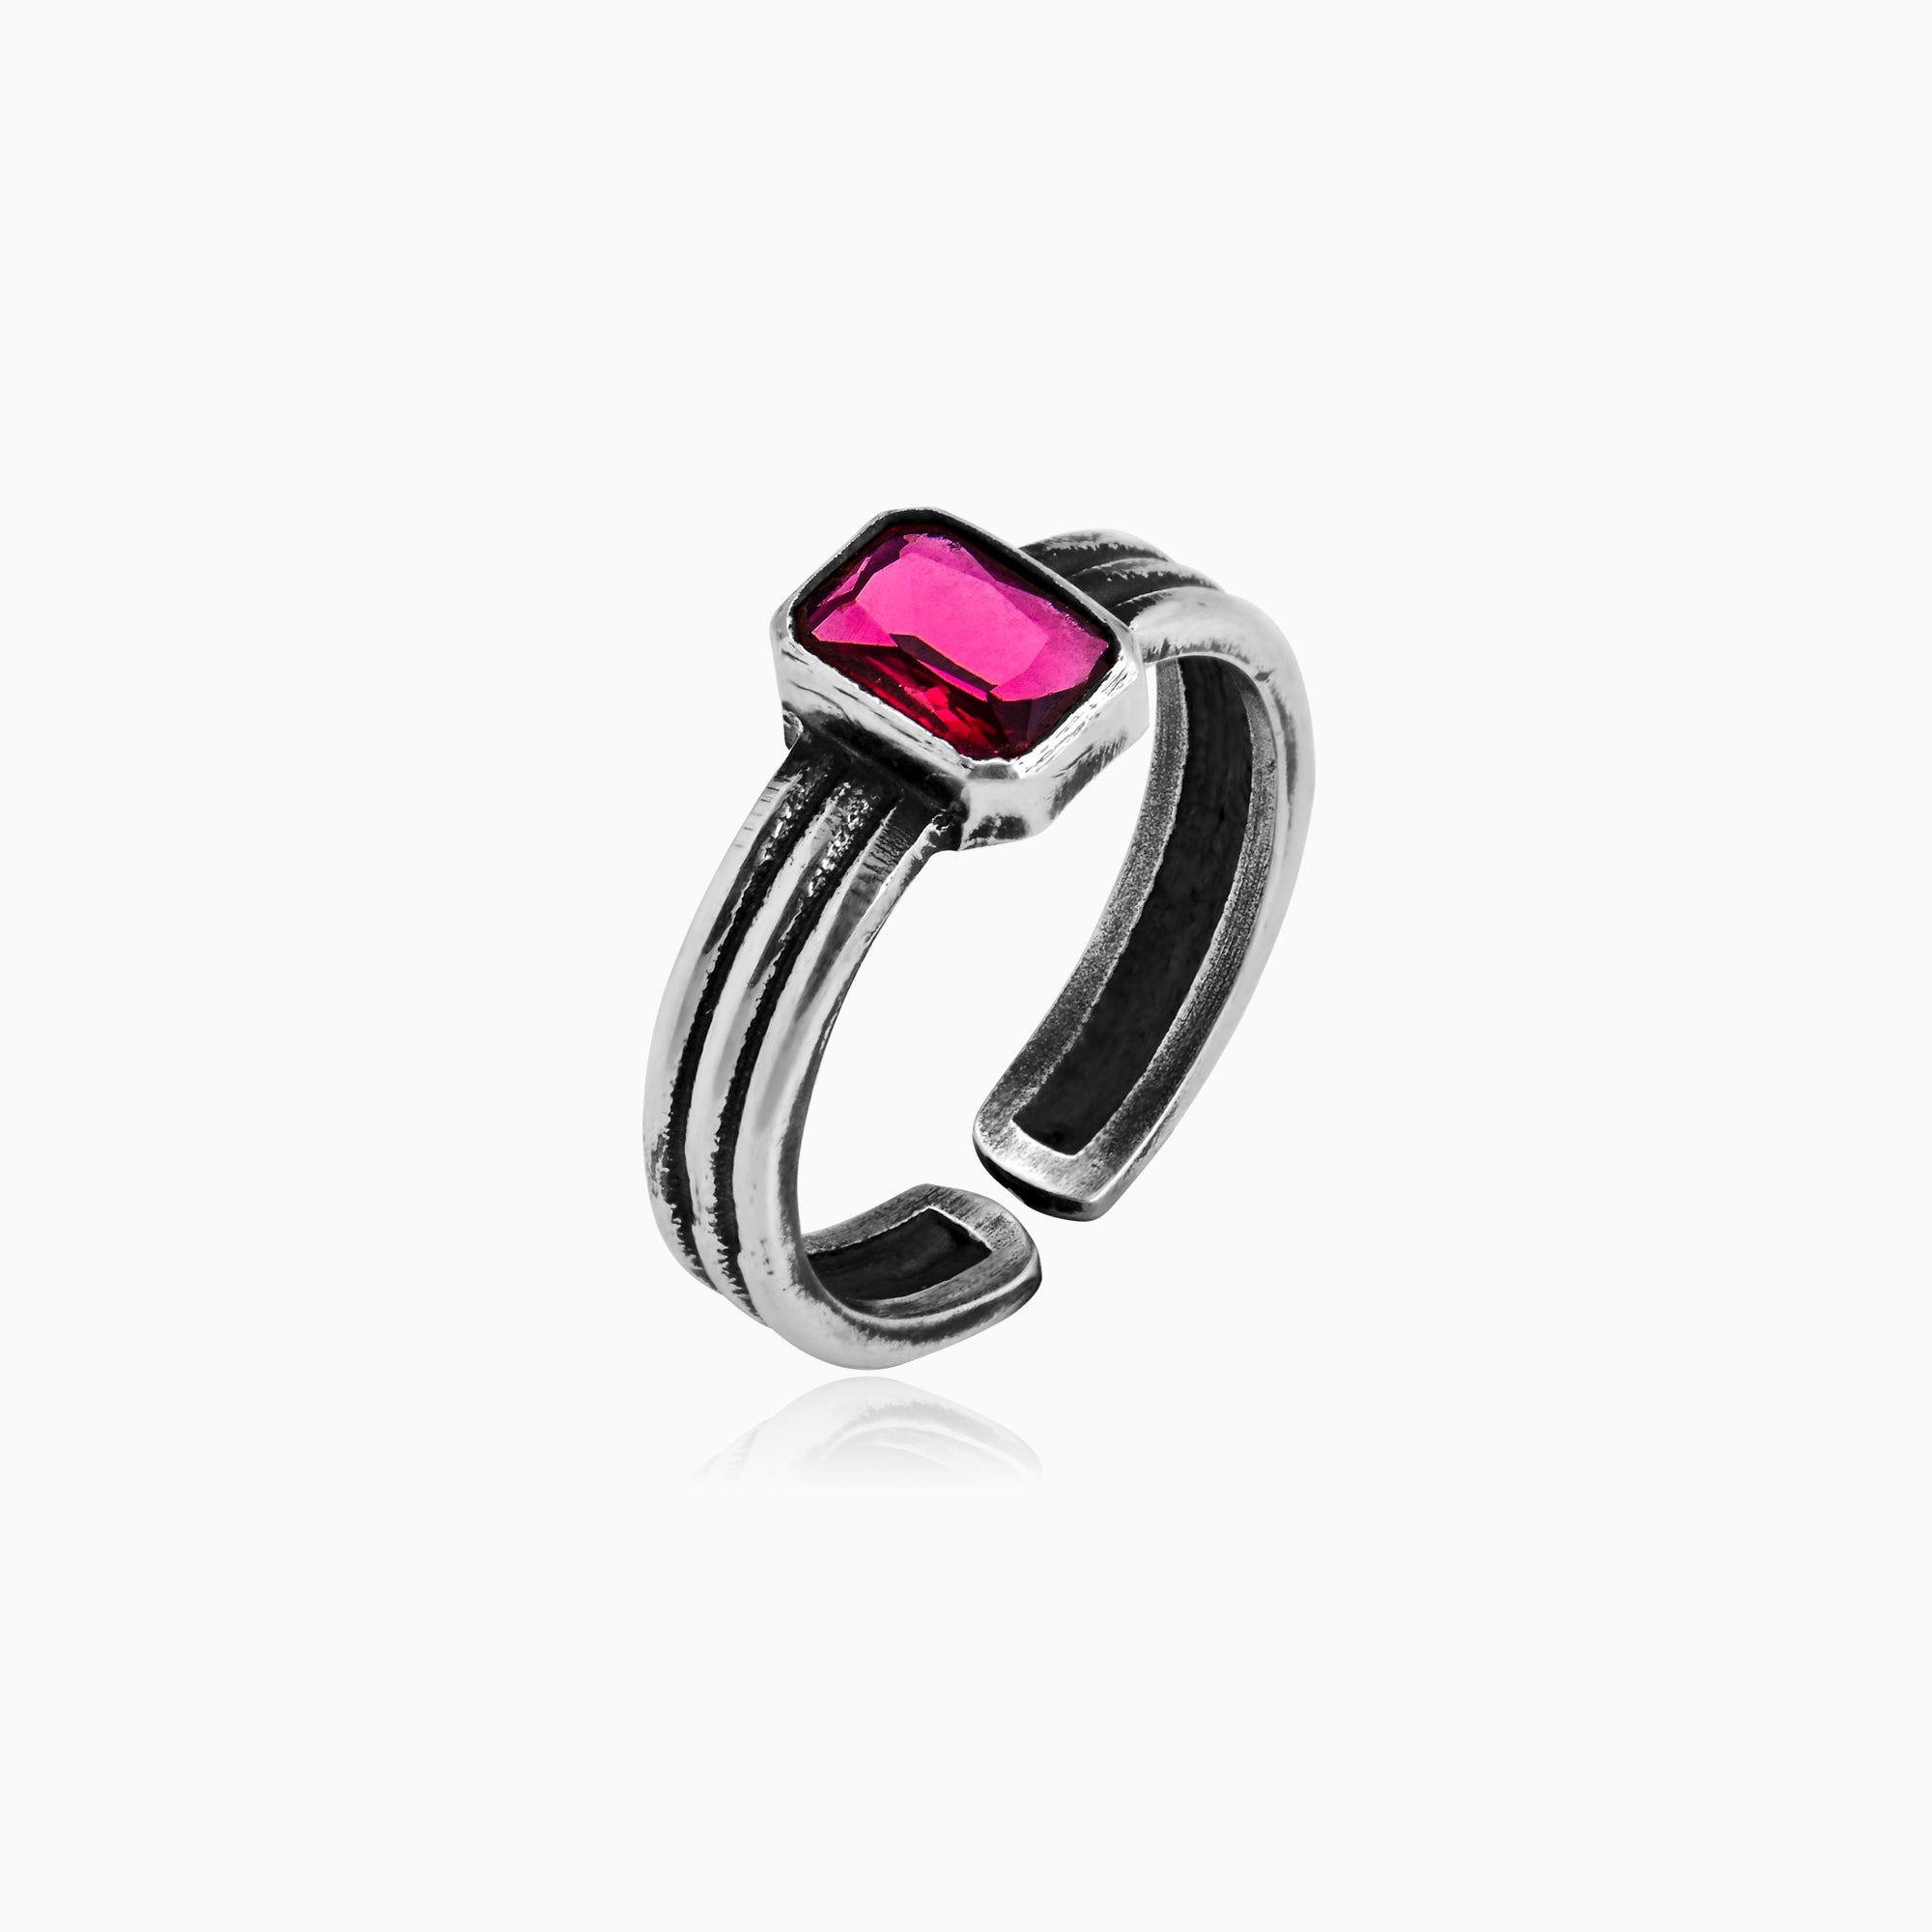 Hot Pink Fuchsia Agate Square Gold Polish Ring at best price in Jaipur